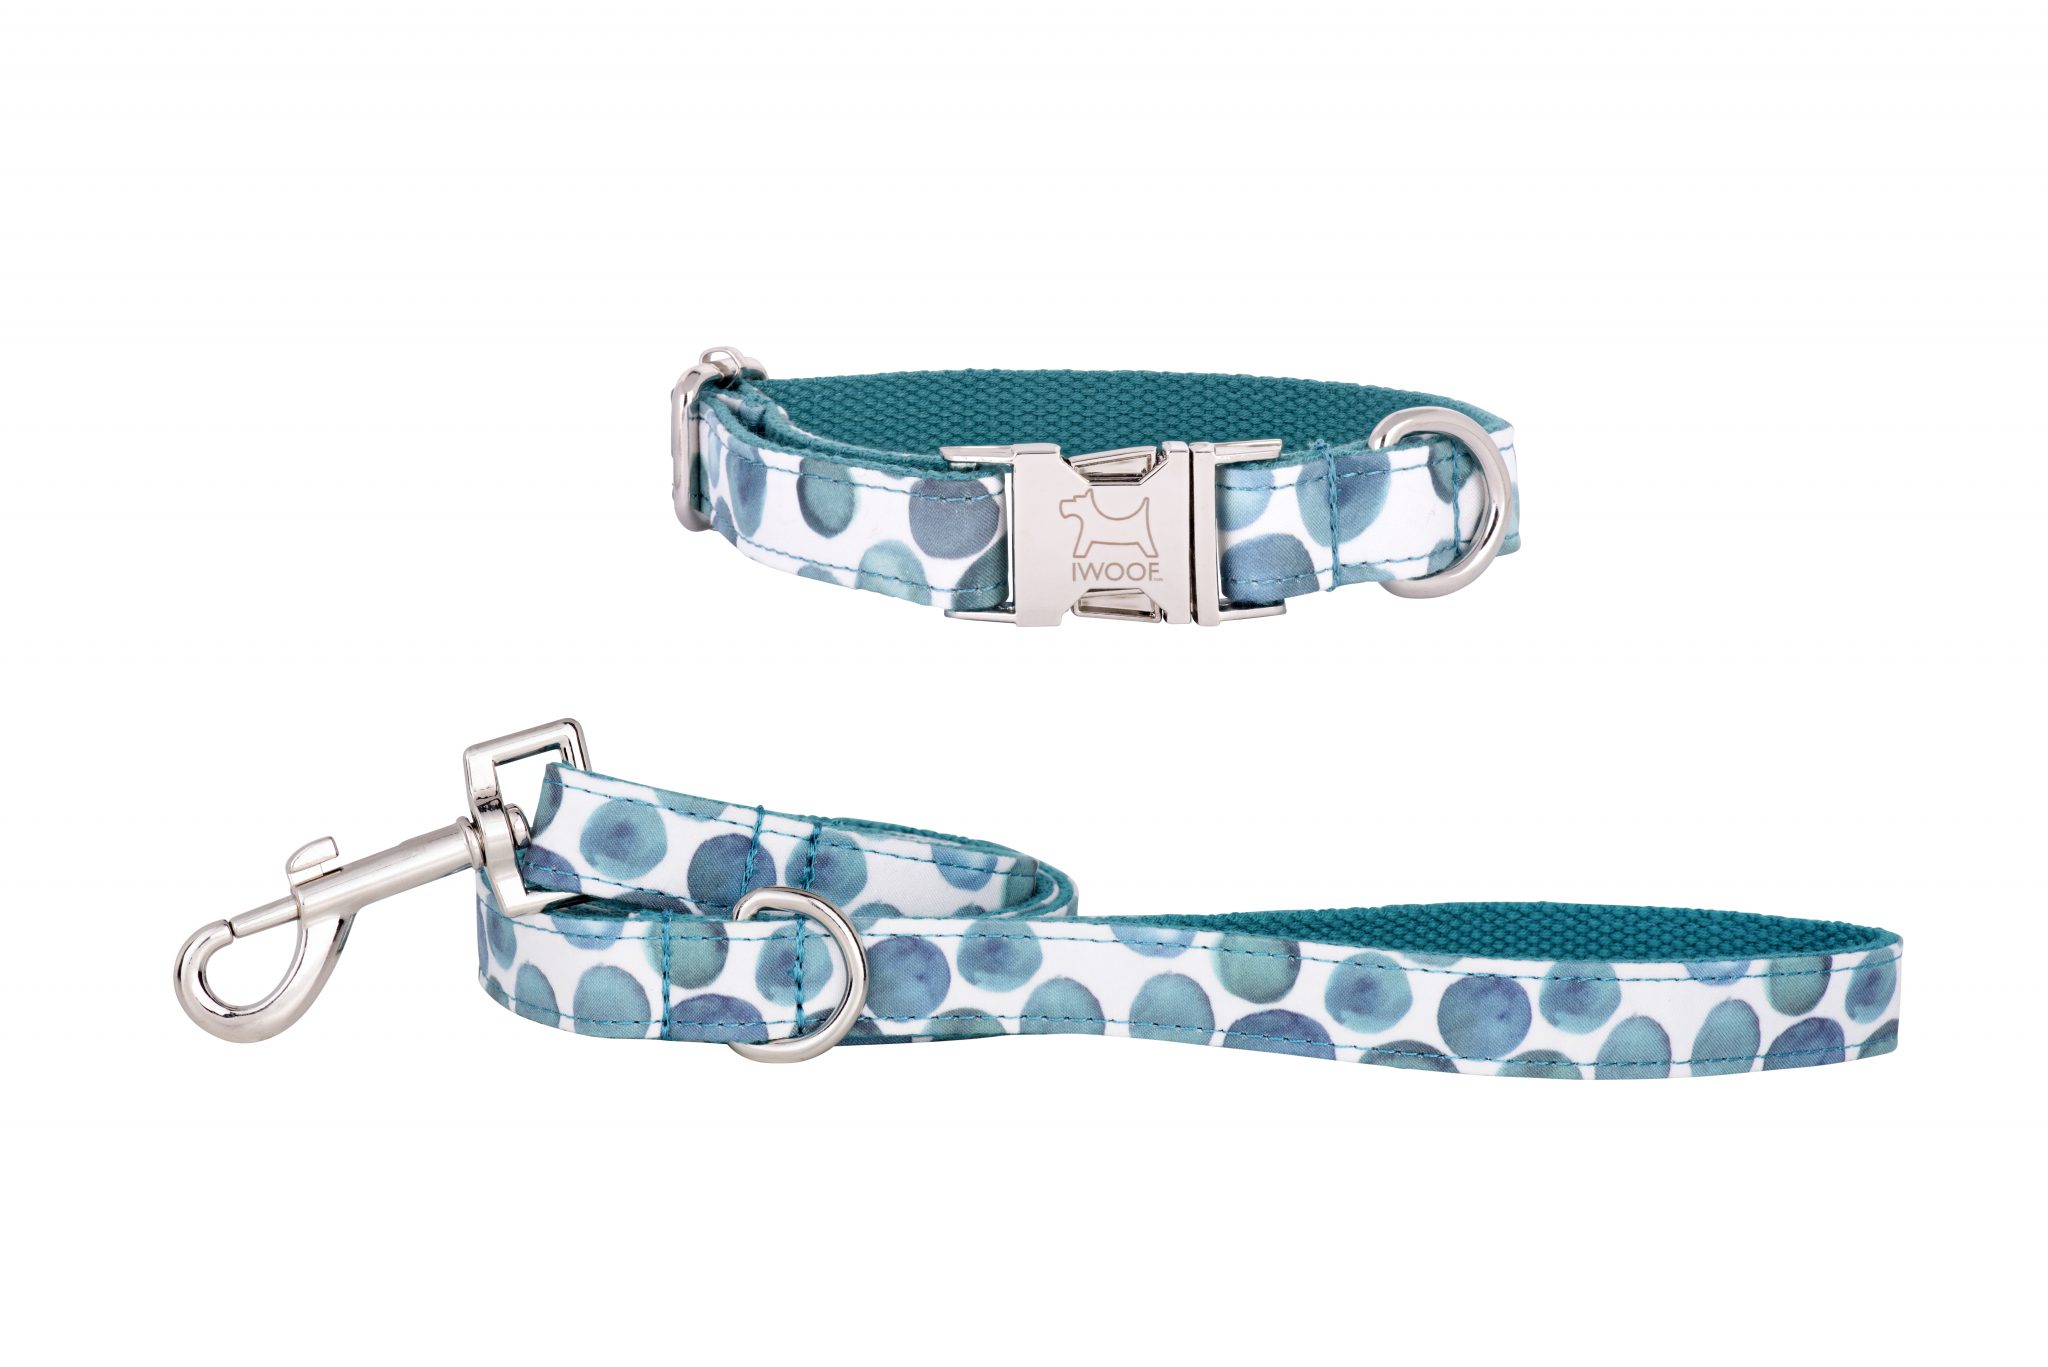 Bubbles designer dog collar and matching designer dog lead by IWOOF